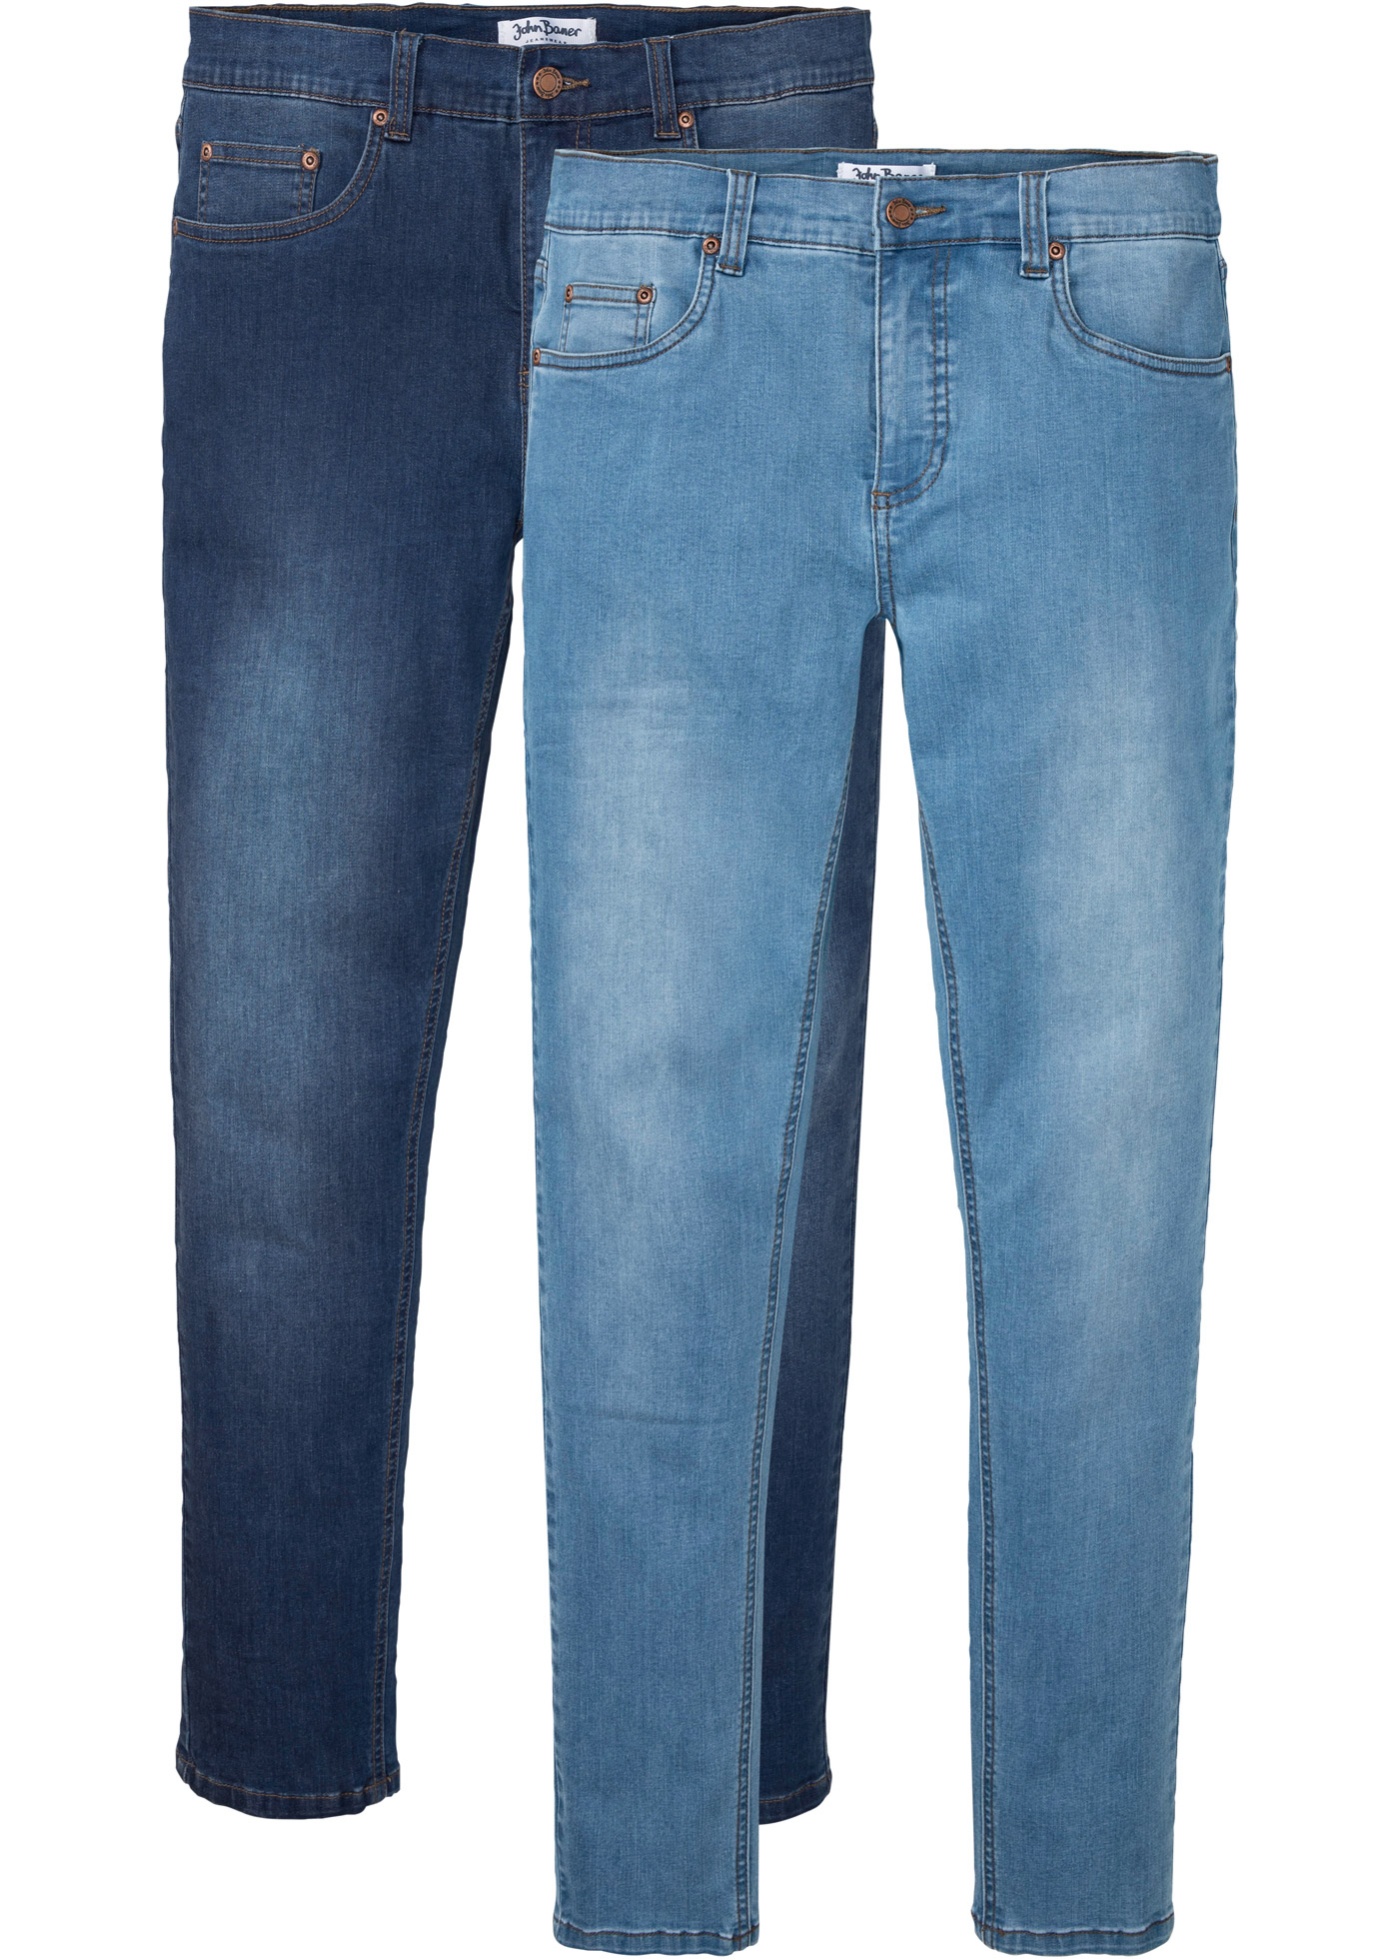 Lot de 2 jeans power stretch Slim Fit, Tapered